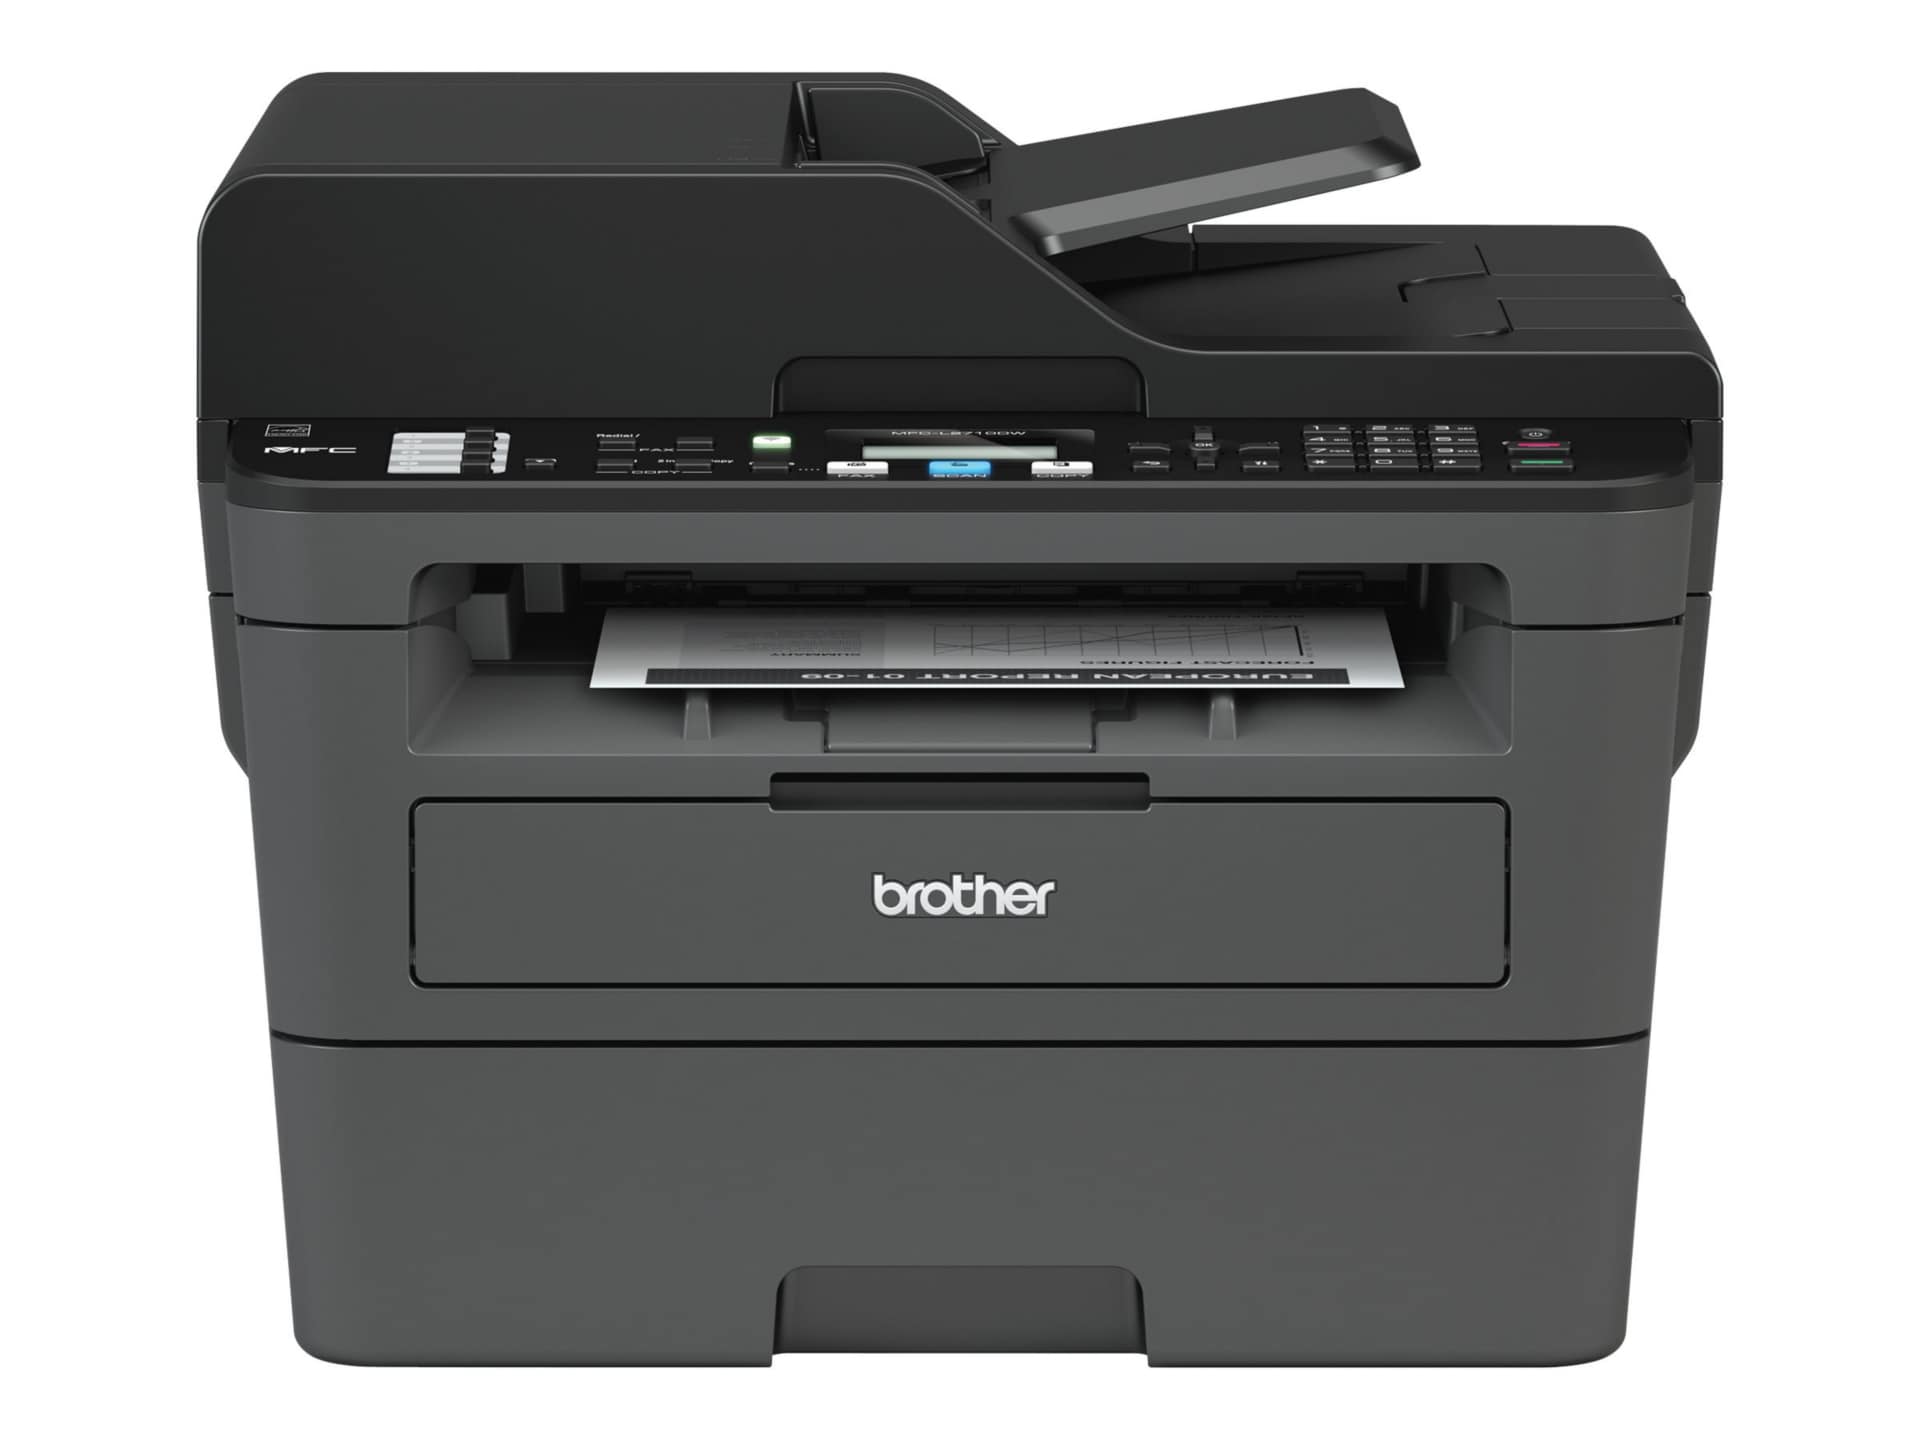 Brother MFC-L2710DW - multifunction printer - B/W - MFCL2710DW